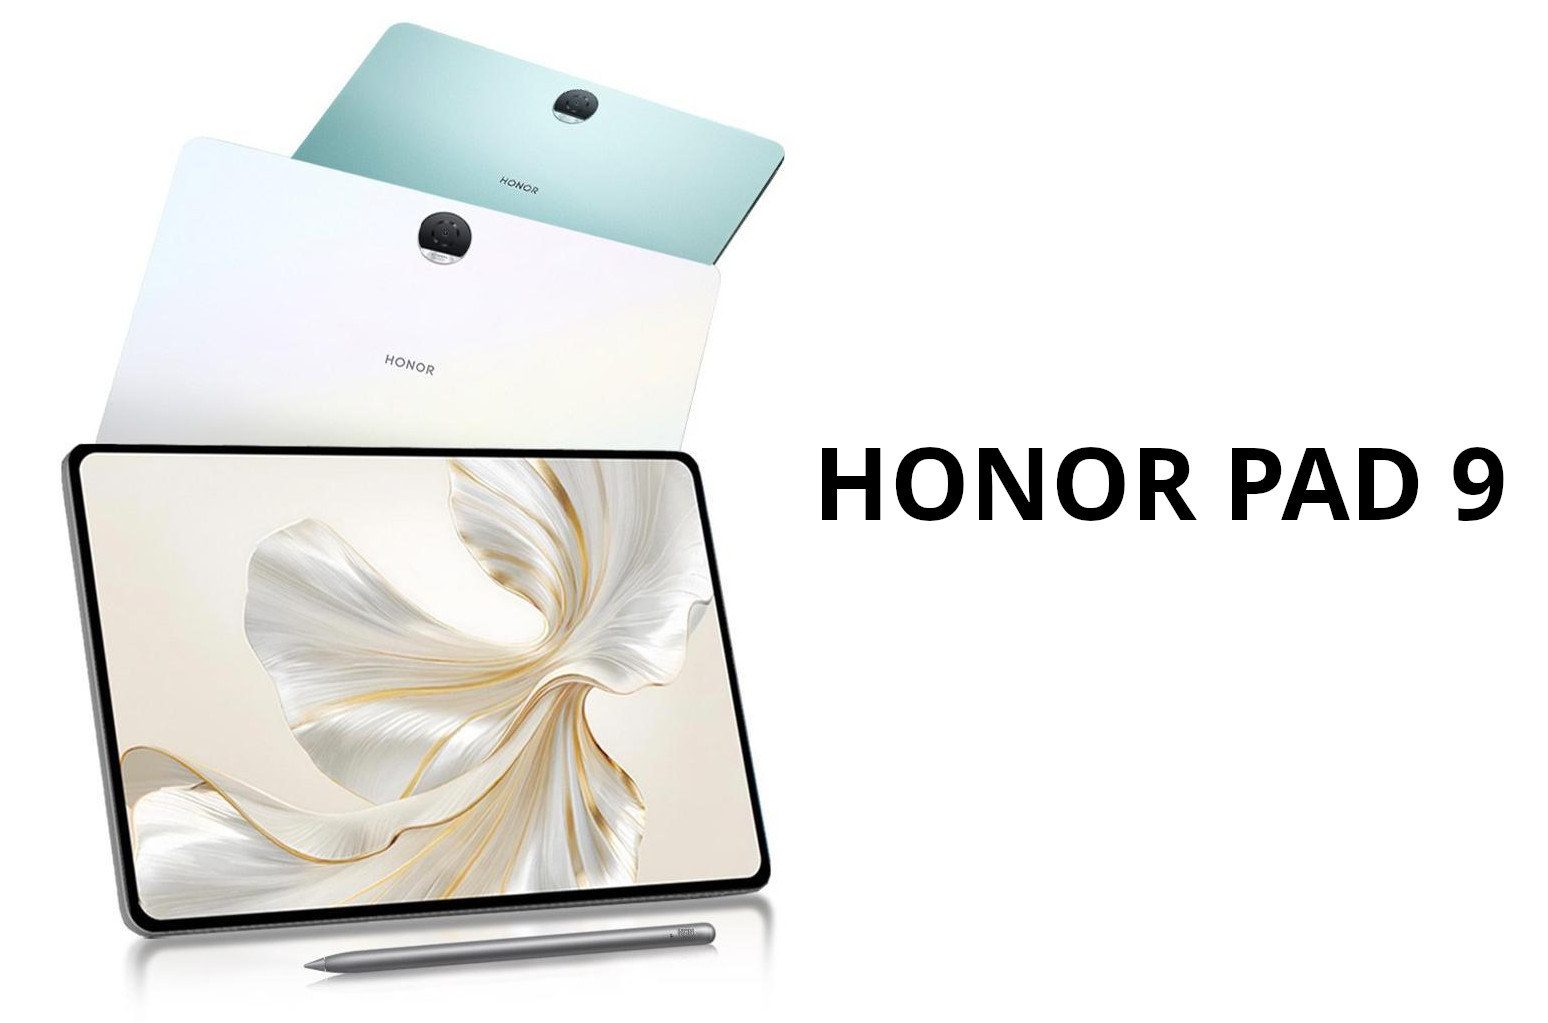 Honor Pad9 launched soon